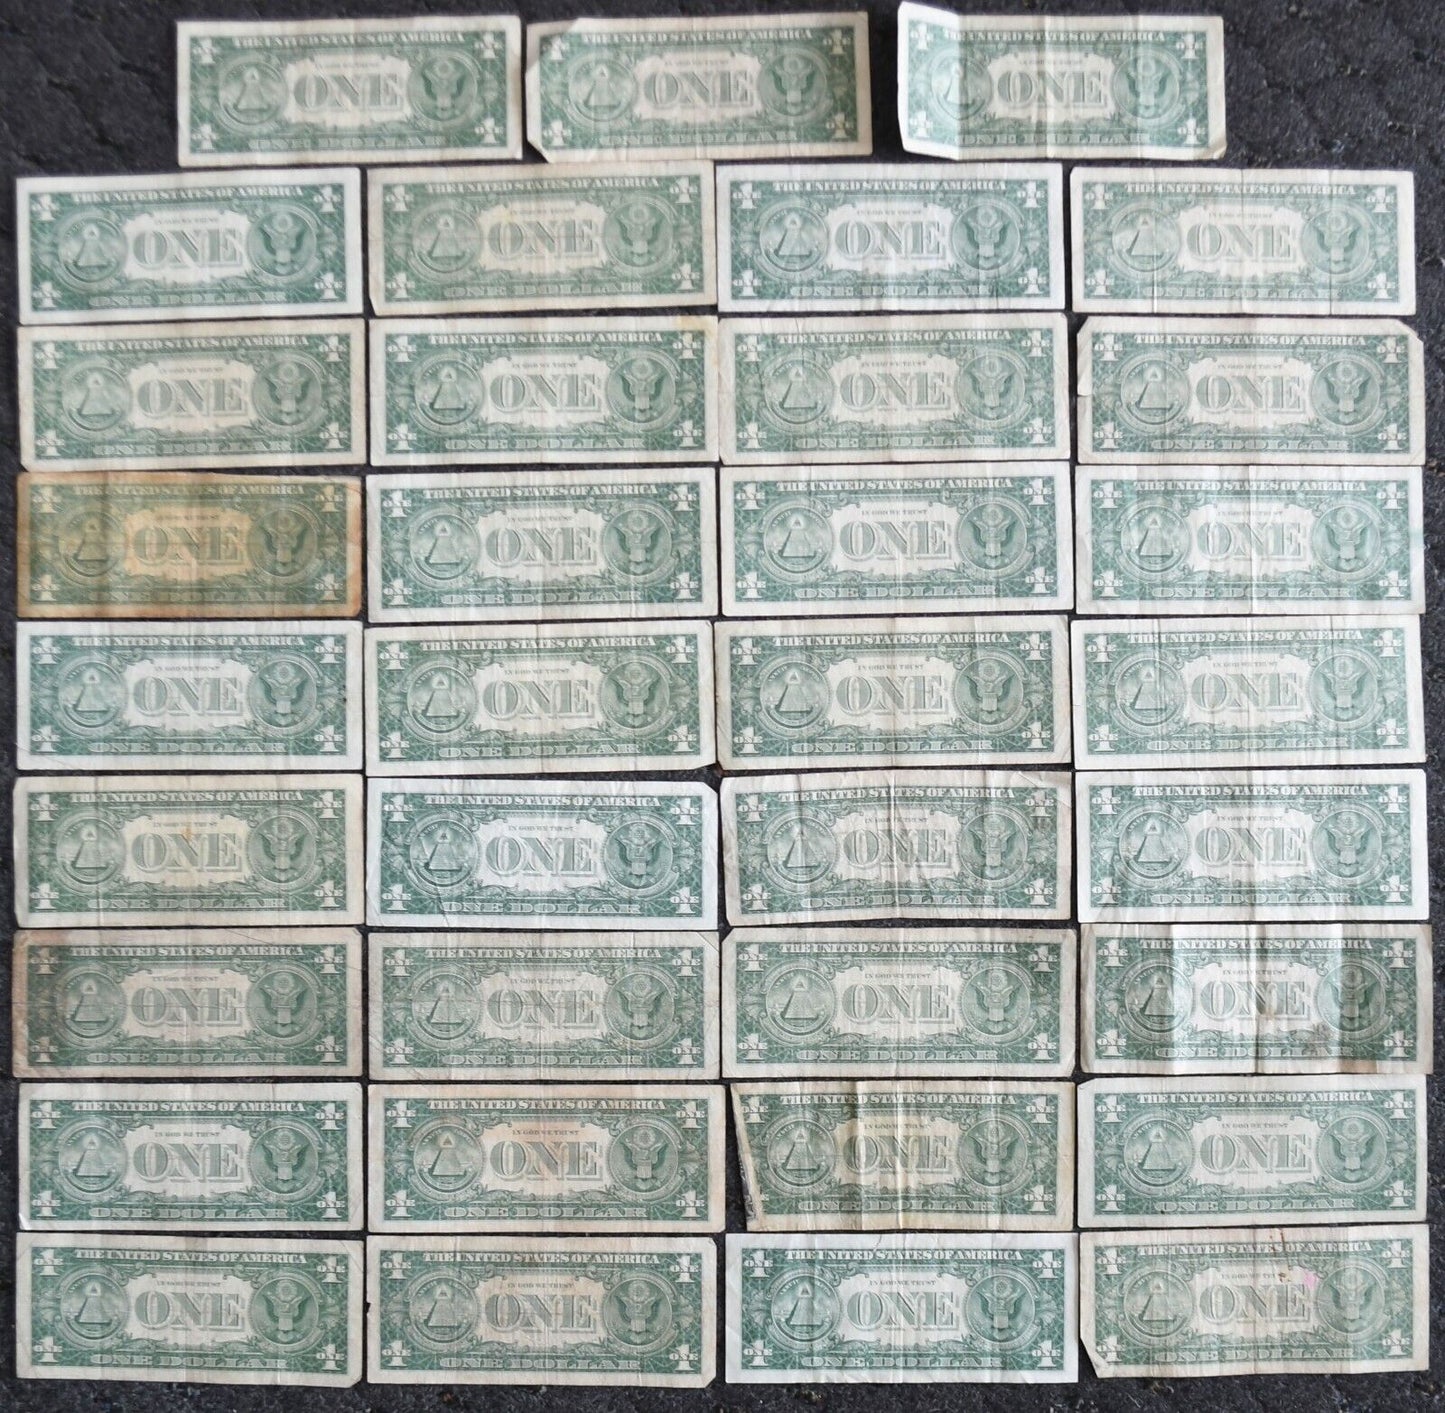 35-  1957 B $1 One Dollar Silver Certificate Blue Seal Star Notes Lot 1957B